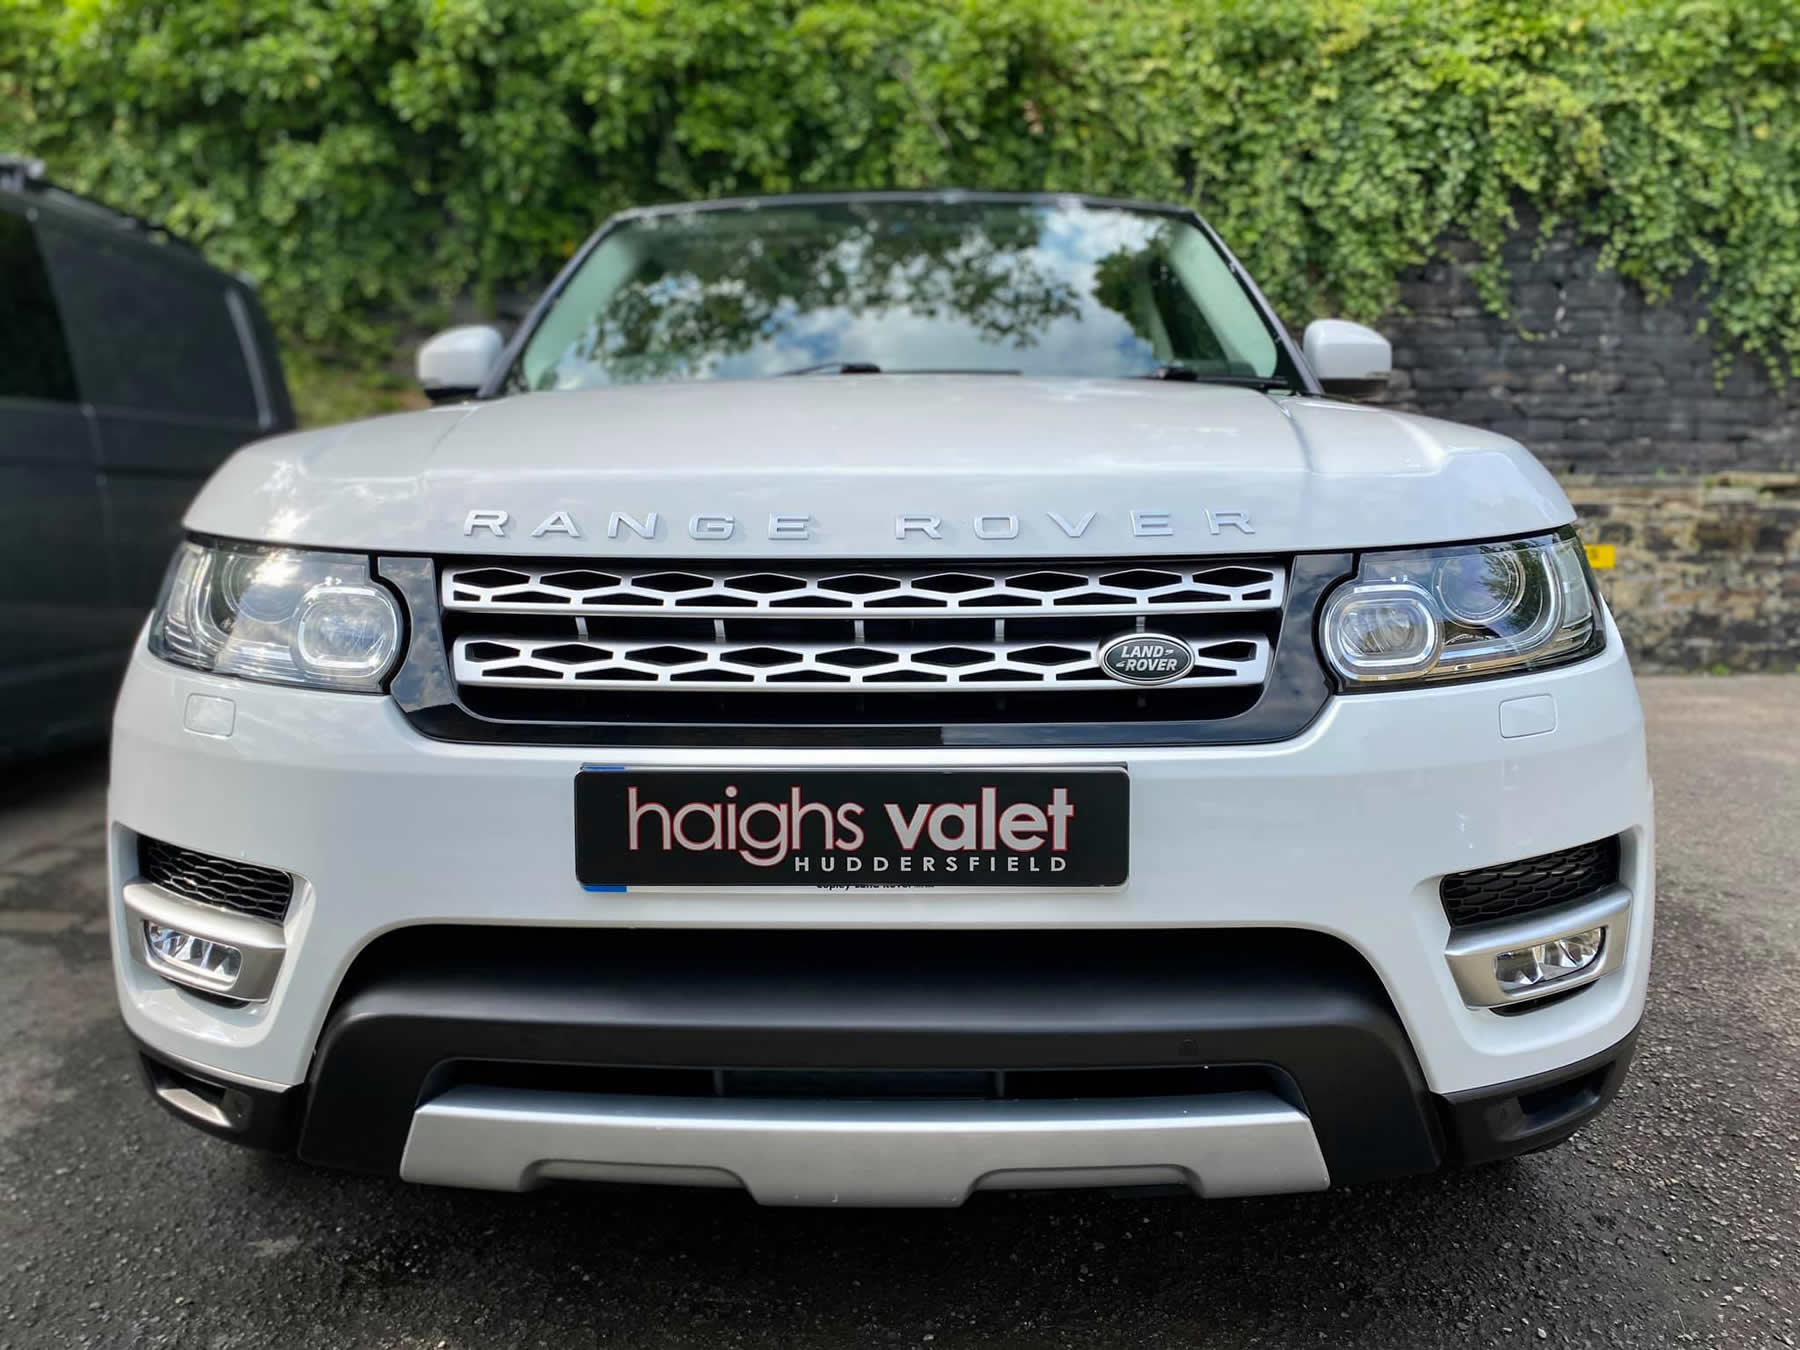 Premium Valet - © Haighs Valet <br />
<b>Strict Standards</b>:  date(): We selected 'Europe/Berlin' for 'CET/1.0/no DST' instead in <b>/homepages/20/d164784699/htdocs/gallery.php</b> on line <b>219</b><br />
2022